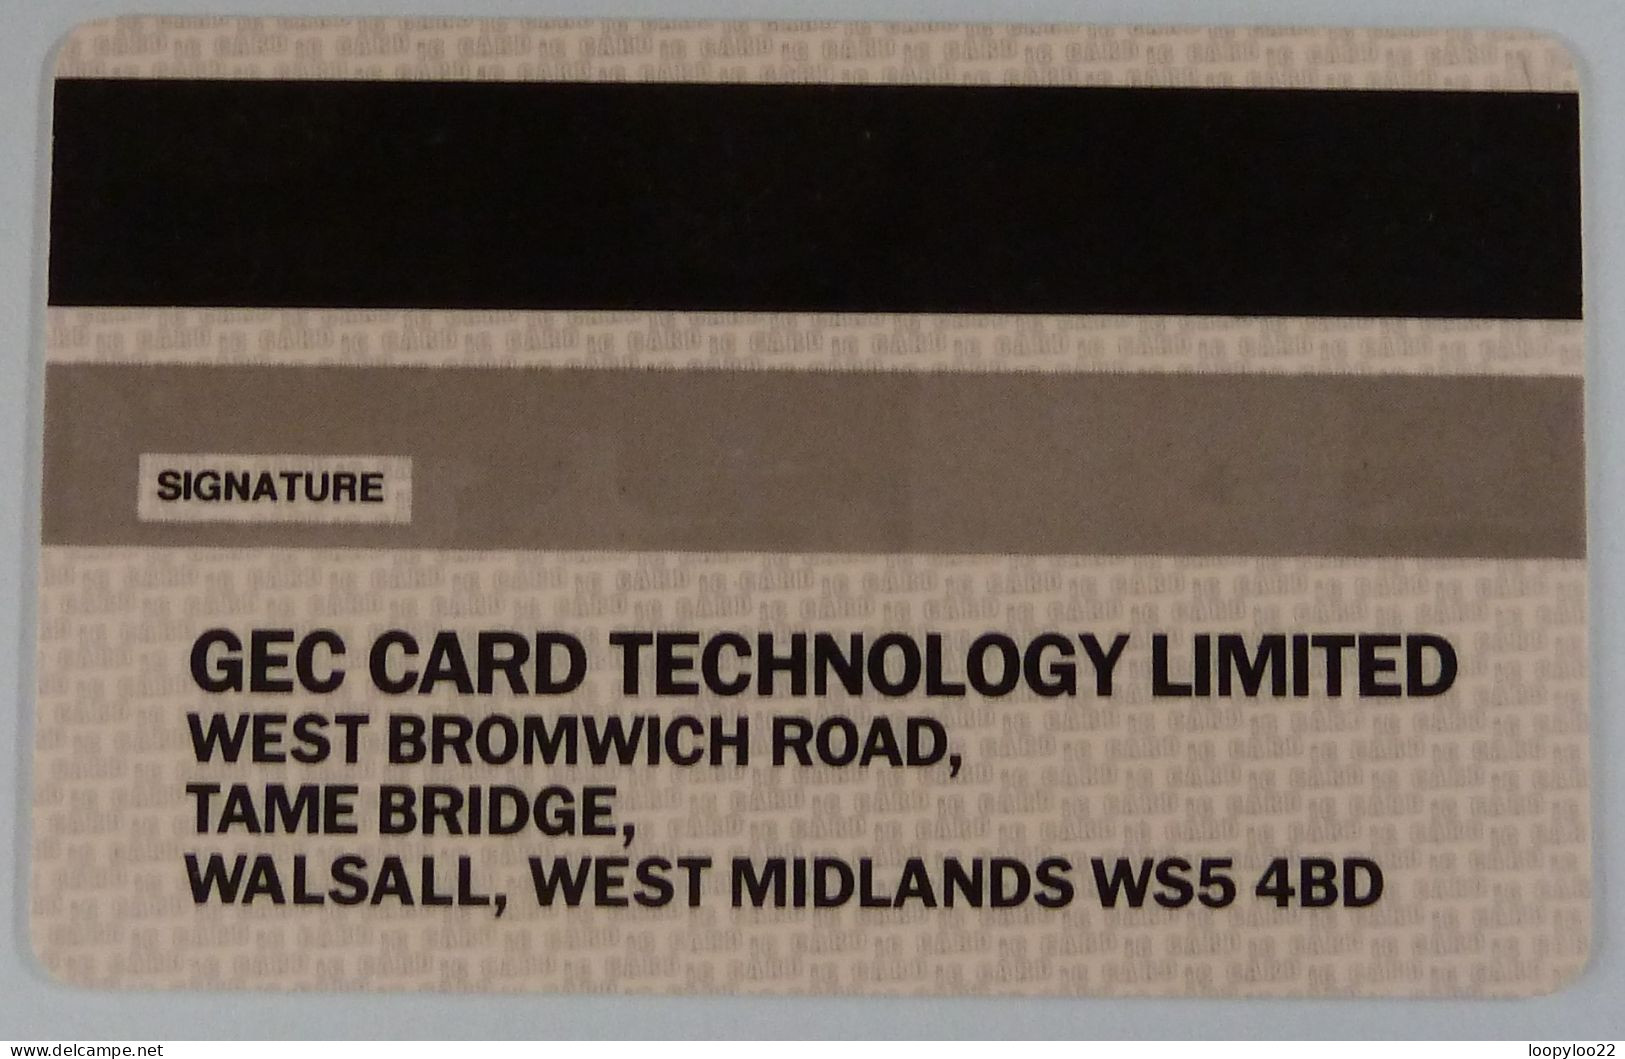 UK - Great Britain - Inteligent Contactless - IC Card - Demo For GEC Card Technology - Collections